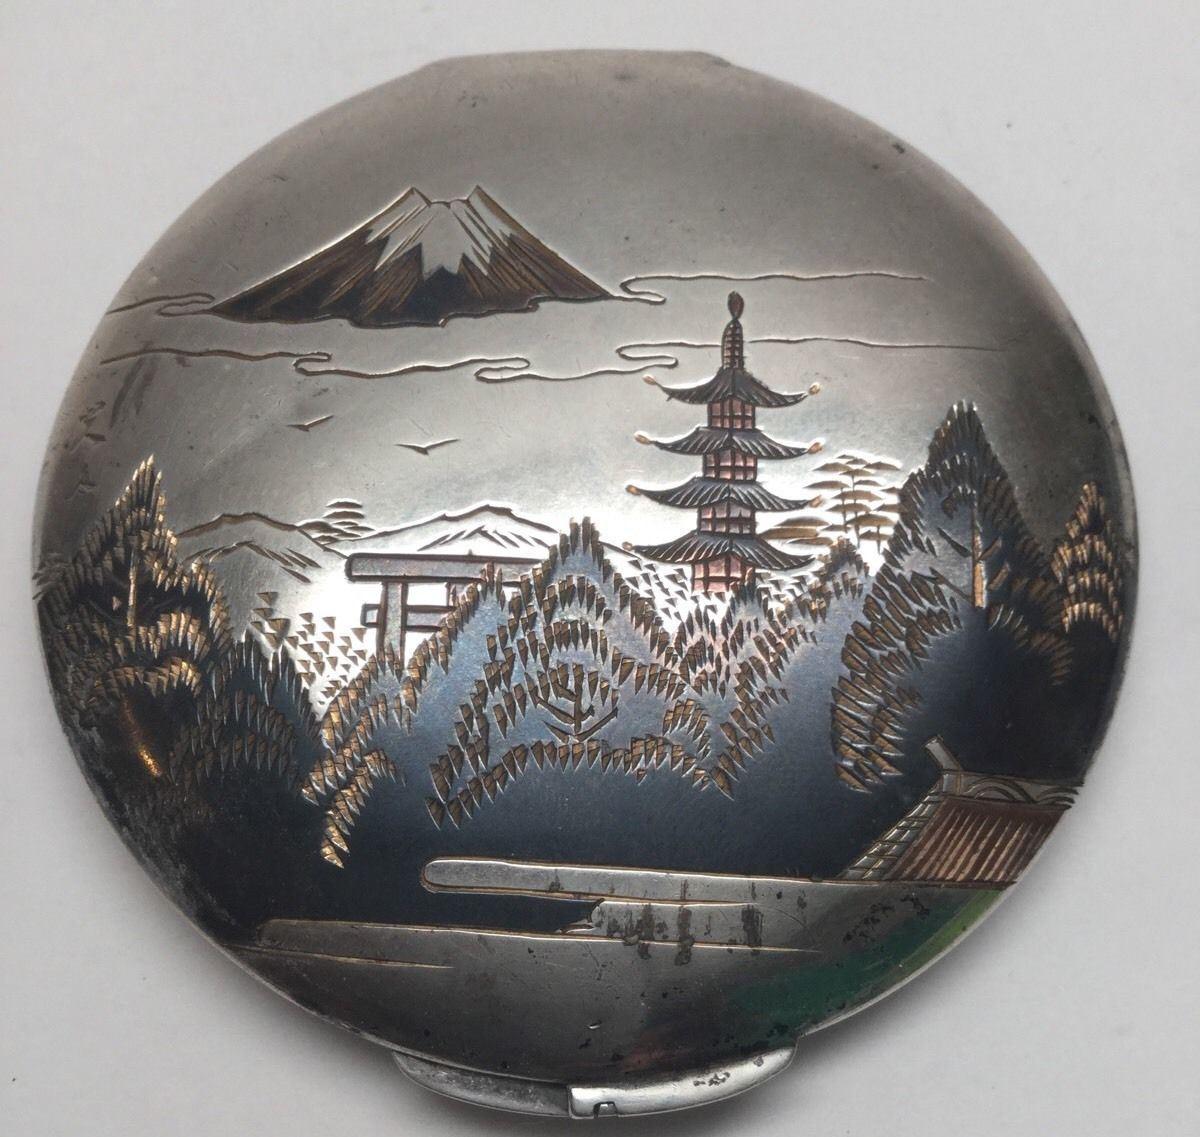 Vintage Japanese sterling silver powder compact. 
Two tone etched damascene of Mt. Fuji in Japan. 
Marked on bottom: MADE IN JAPAN, STERLING SILVER. 
Measures: 3 1/4